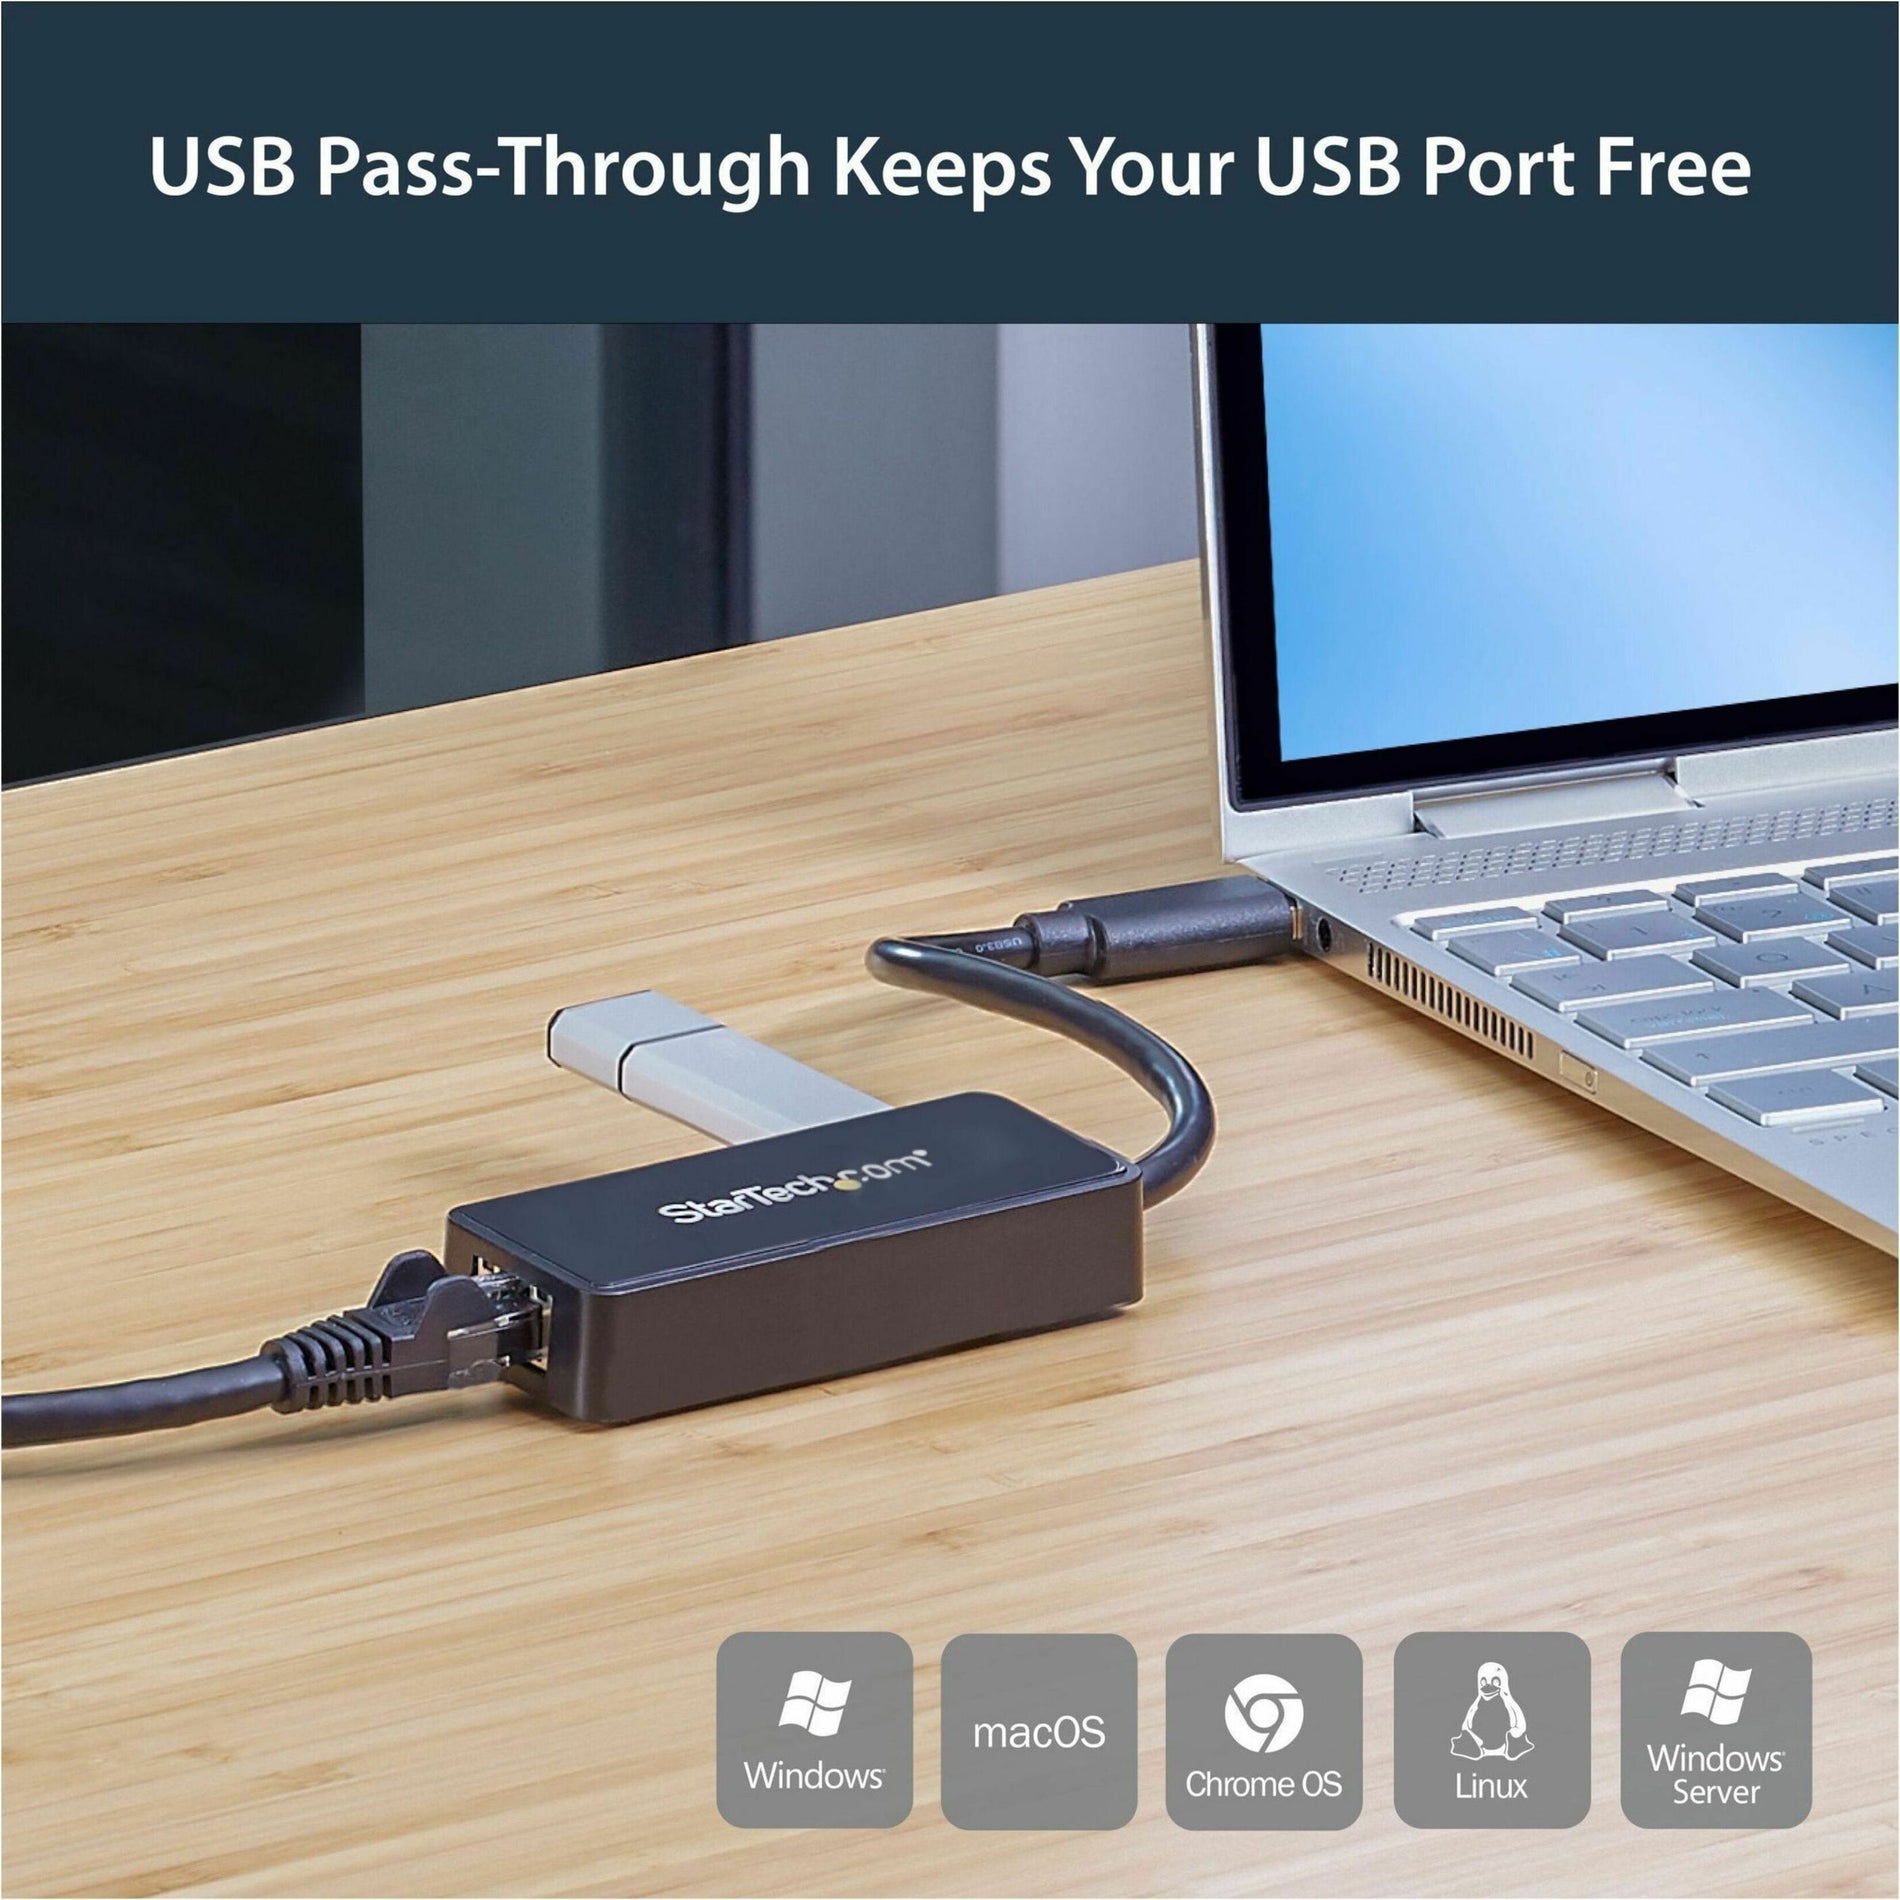 StarTech.com USB31000SPTB USB 3.0 to Gigabit Ethernet Adapter NIC w/ USB Port - Black, High-Speed Internet Connection for Your PC